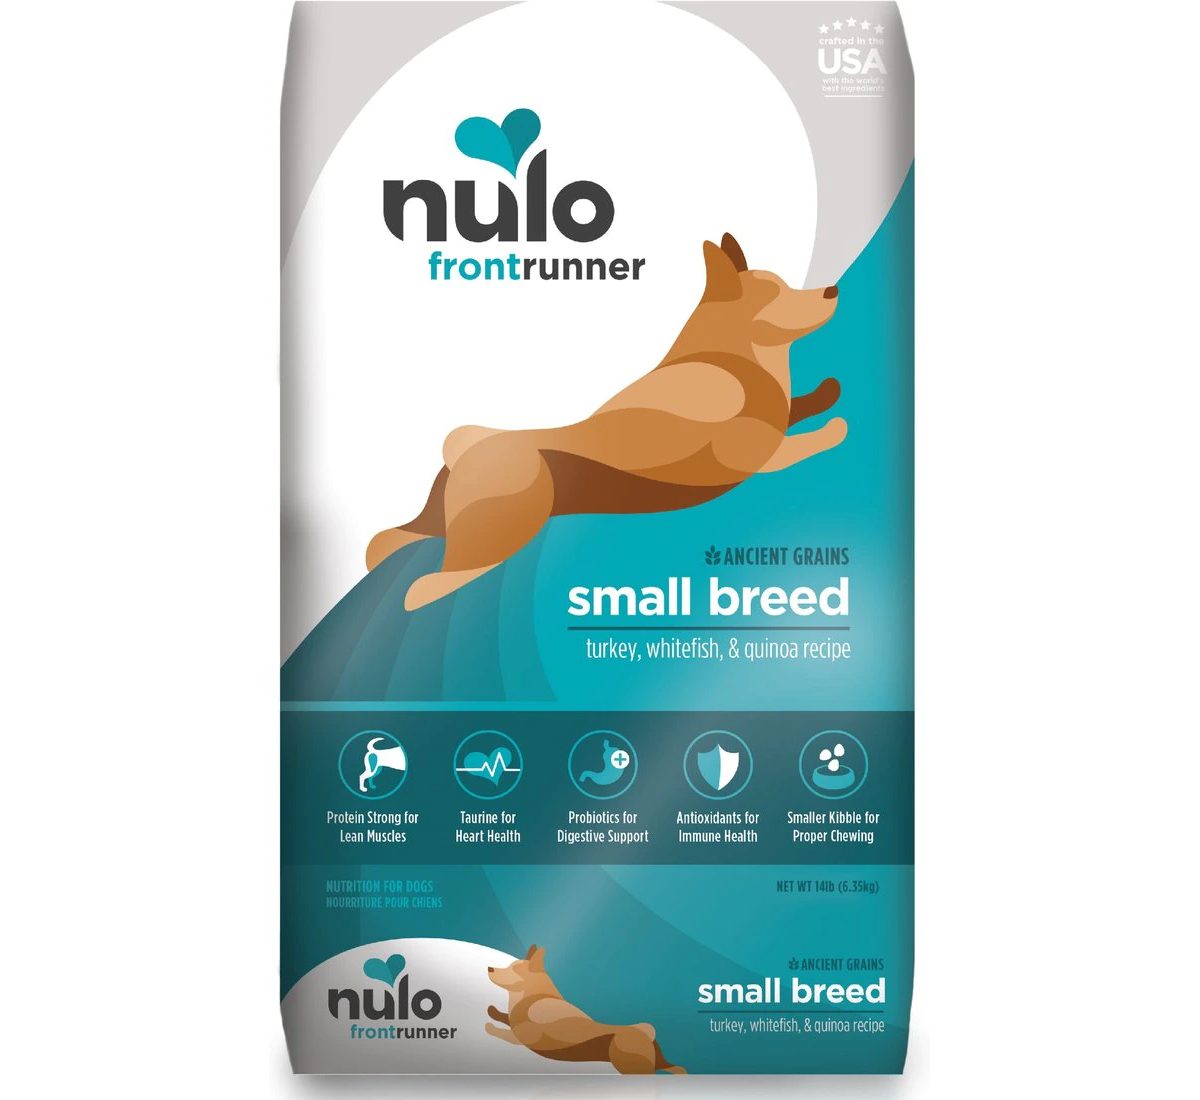 Nulo Frontrunner Ancient Grains Small Breed Food